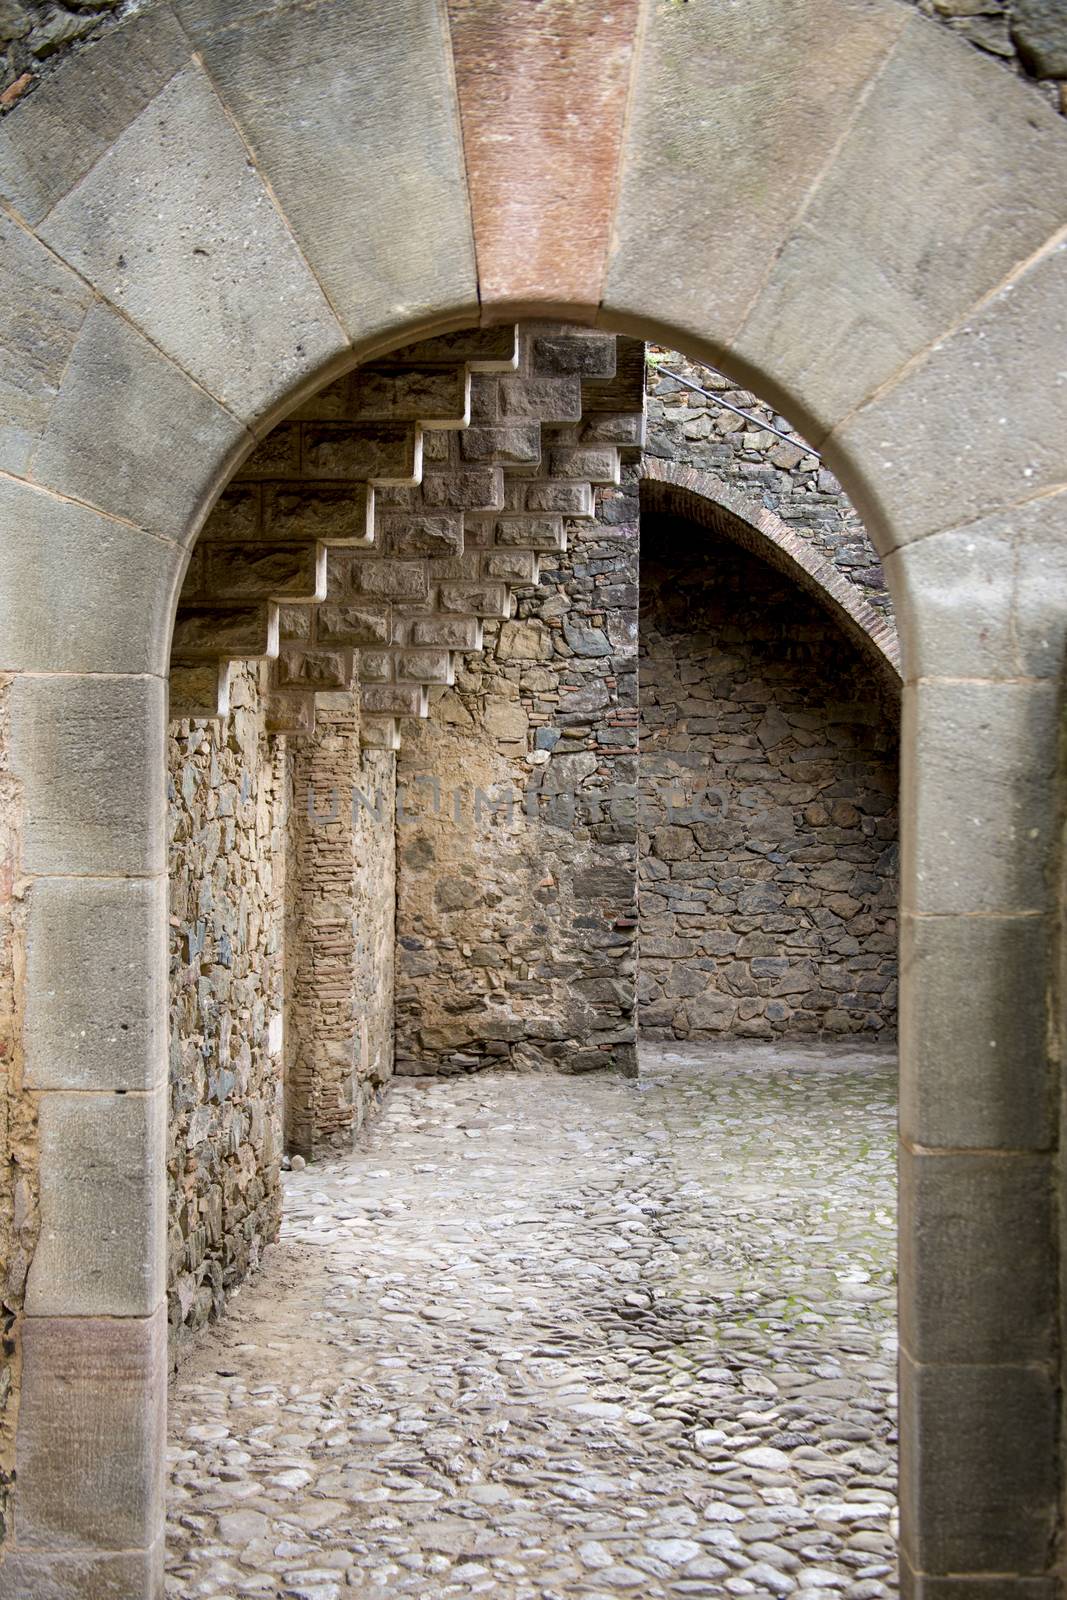 Architectural arch of natural stone, leading to the courtyard with stone paving of the Torre Bellesguard, built by the great Spanish architect Antoni Gaudi.